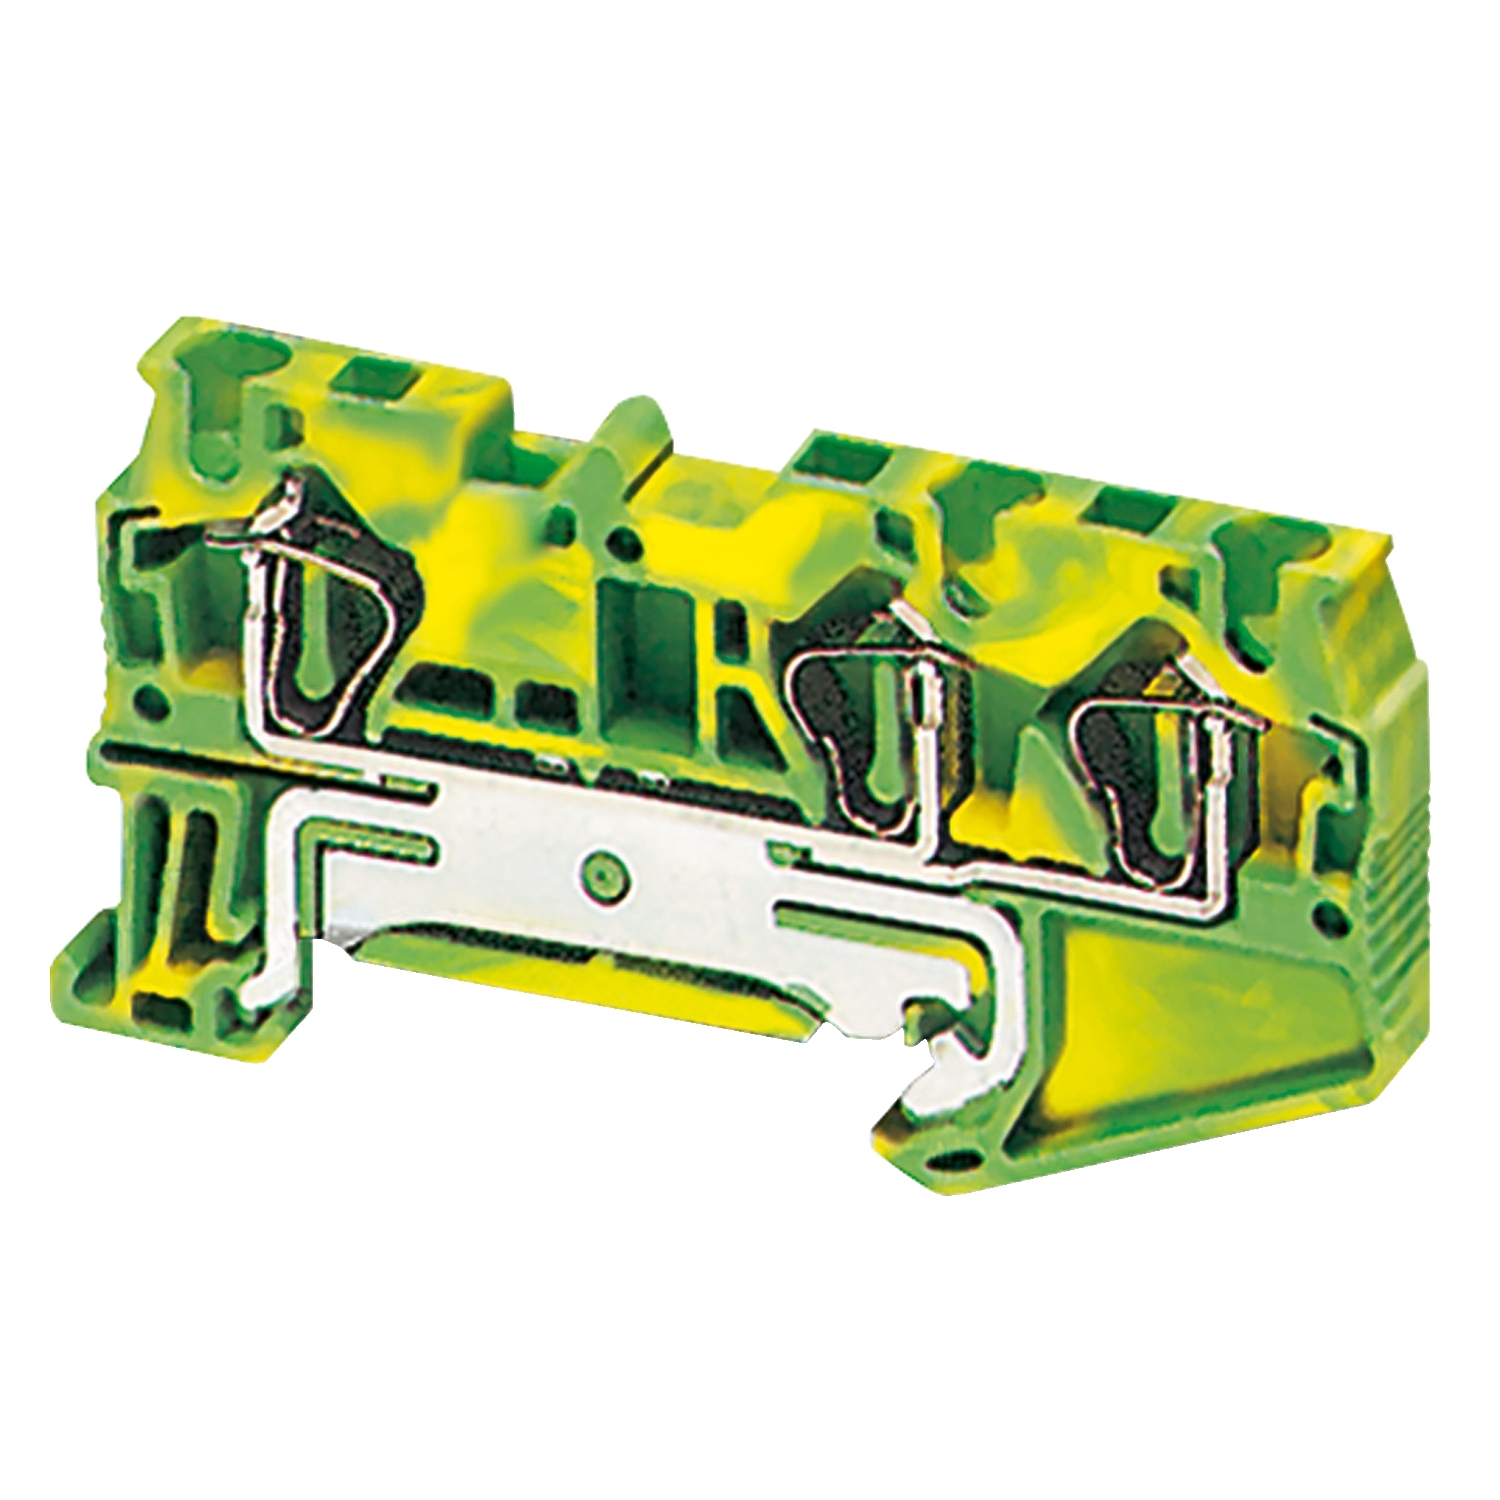 Terminal block, Linergy TR, spring type, protective earth, 3 points, 4mm², green-yellow, set of 50